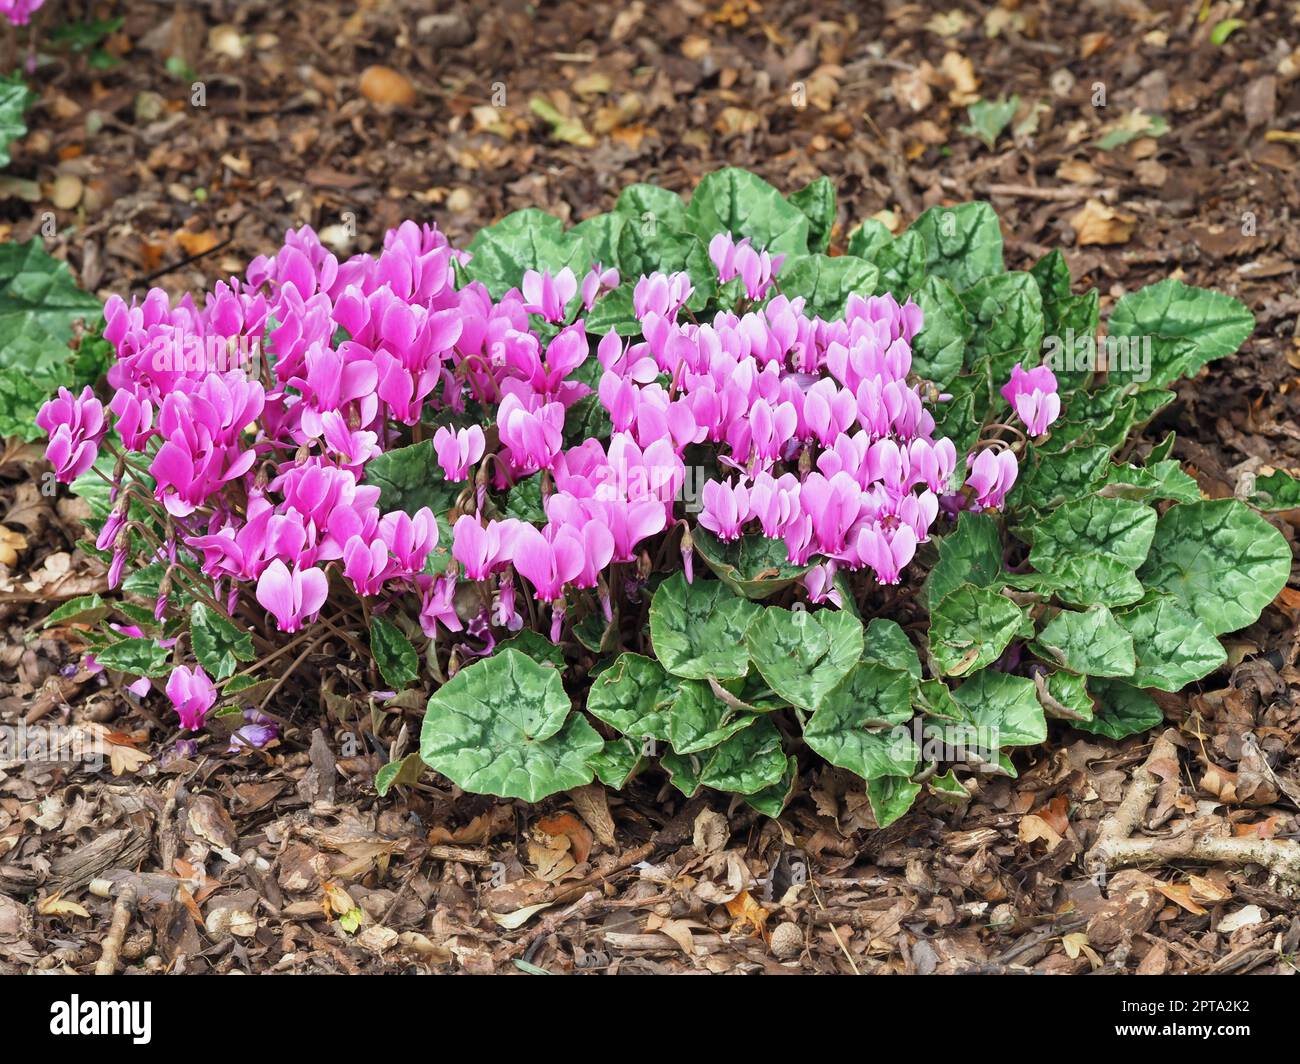 Cyclamen hederifolium plant with bright pink flowers and attractive variegated leaves growing in a garden bed Stock Photo